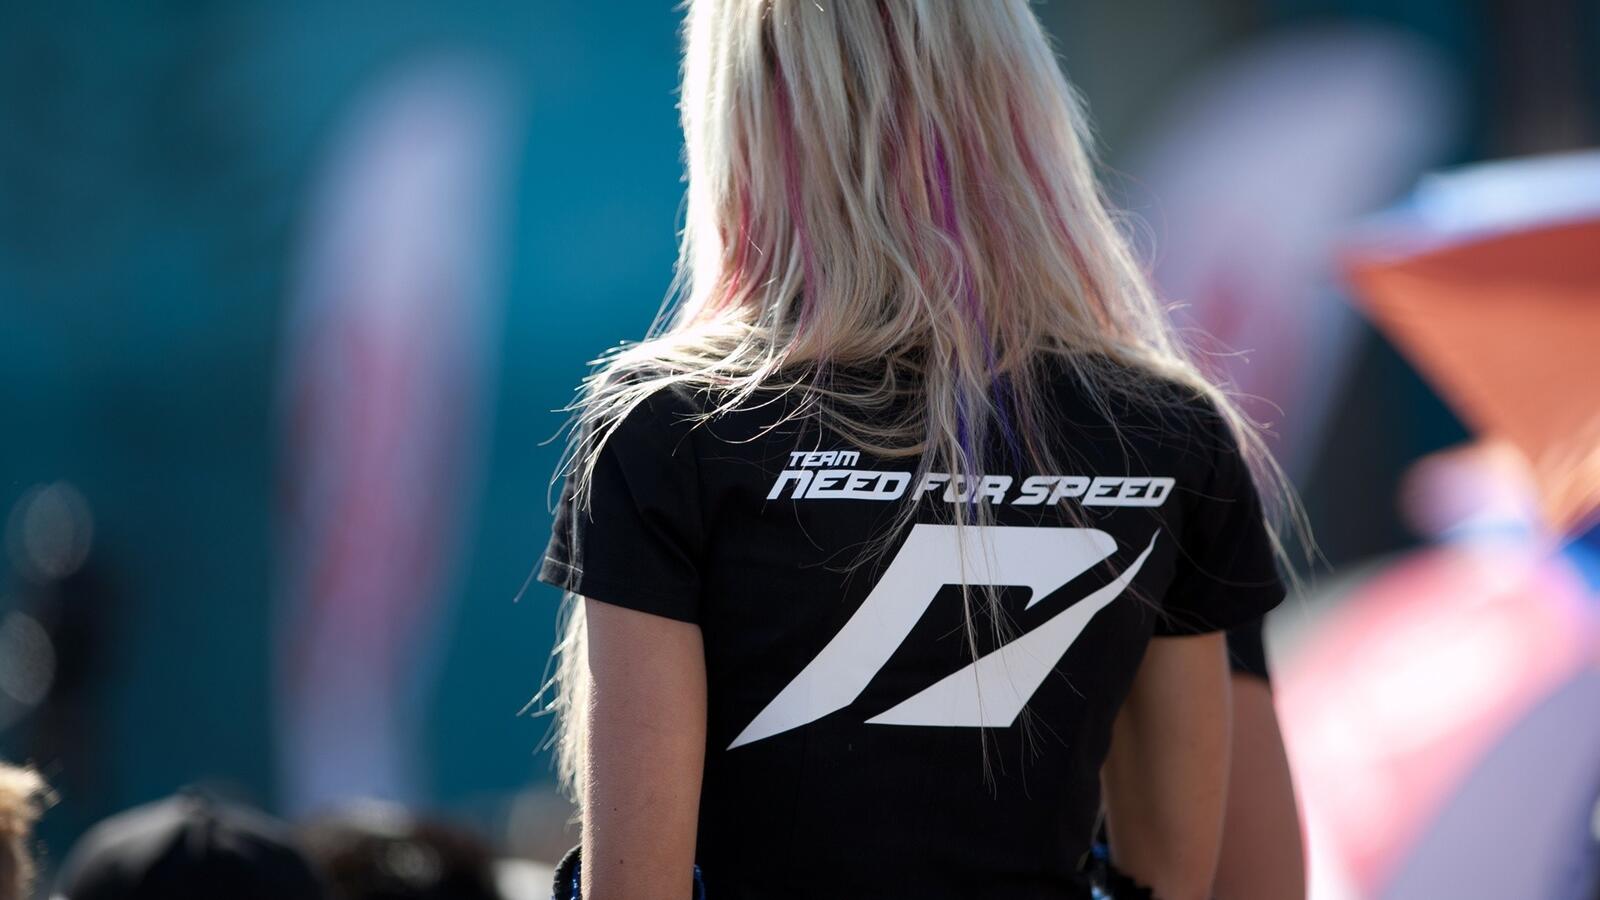 Free photo girl in a Need for Speed t-shirt